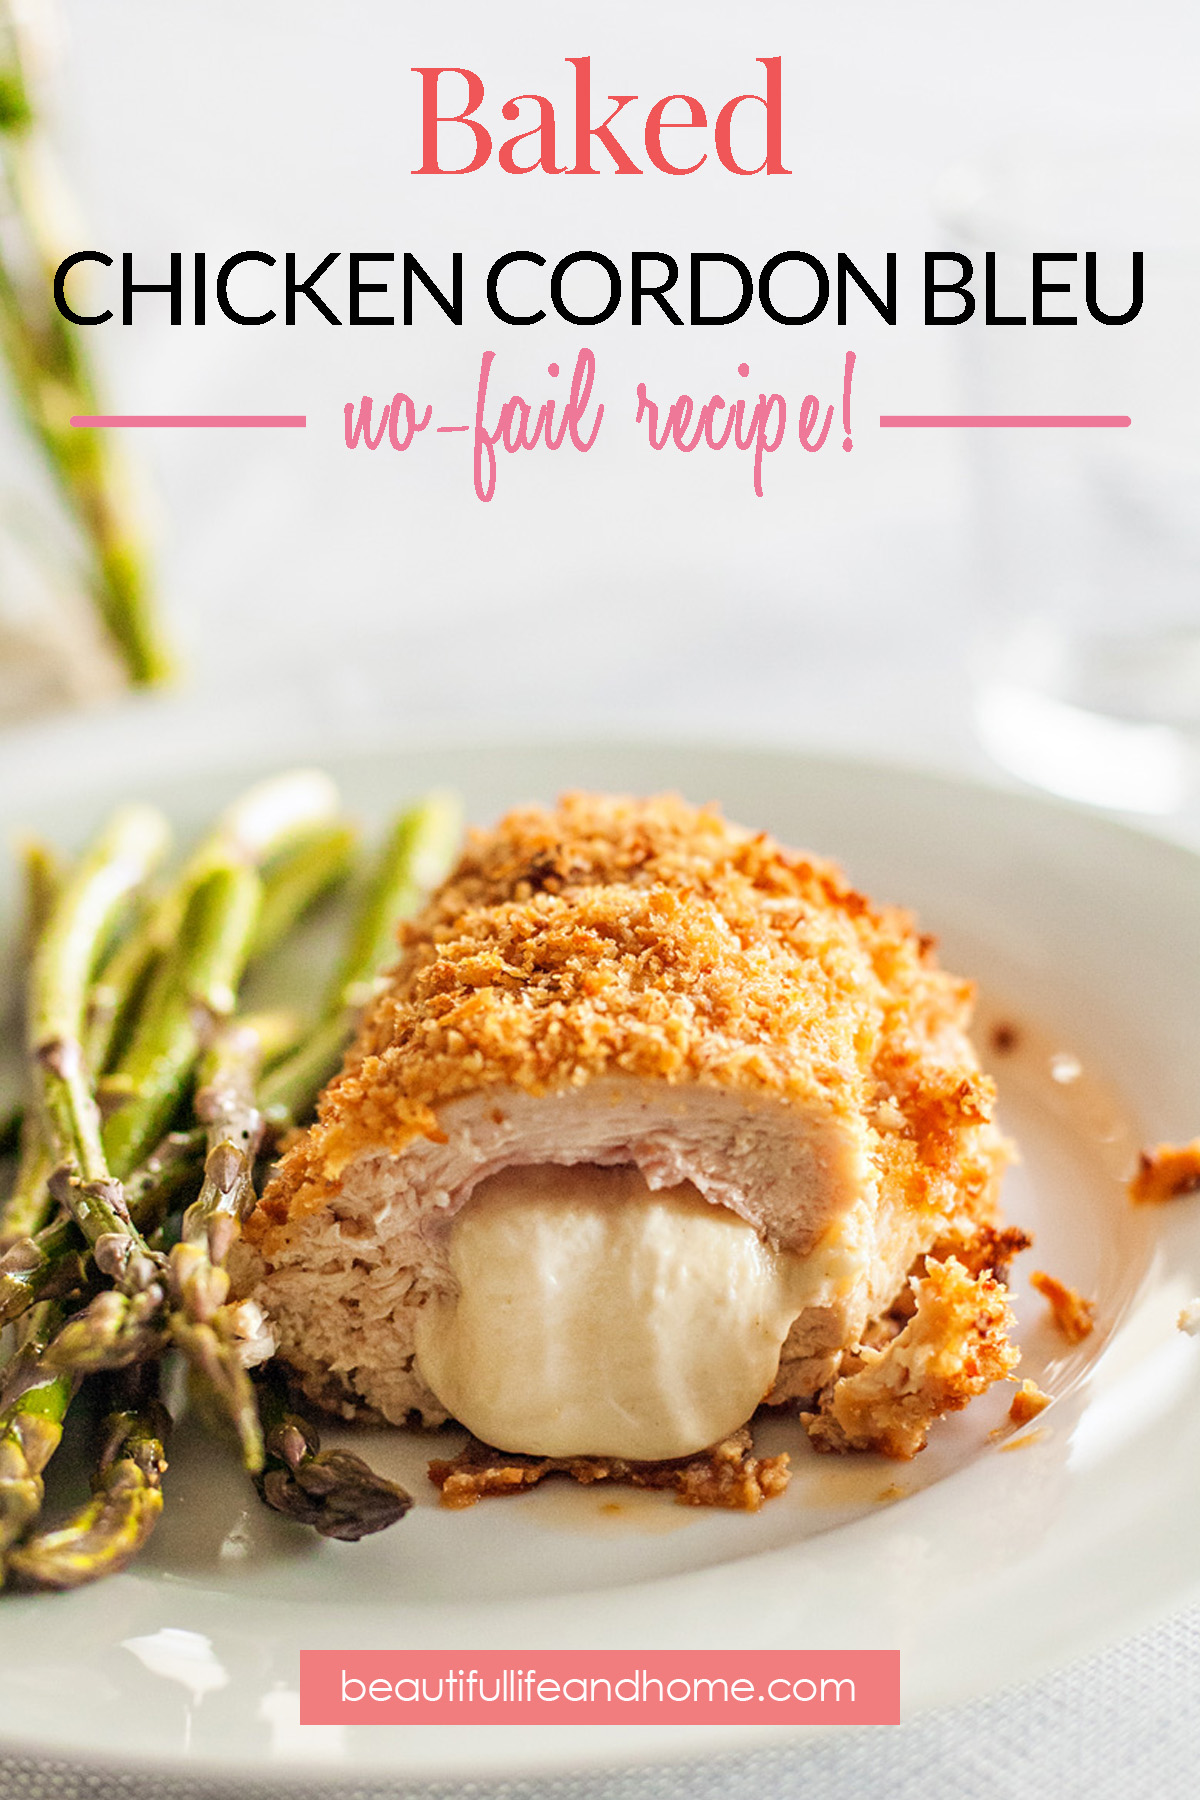 Classic Chicken Cordon Bleu (Baked or Fried) - The Stay At Home Chef